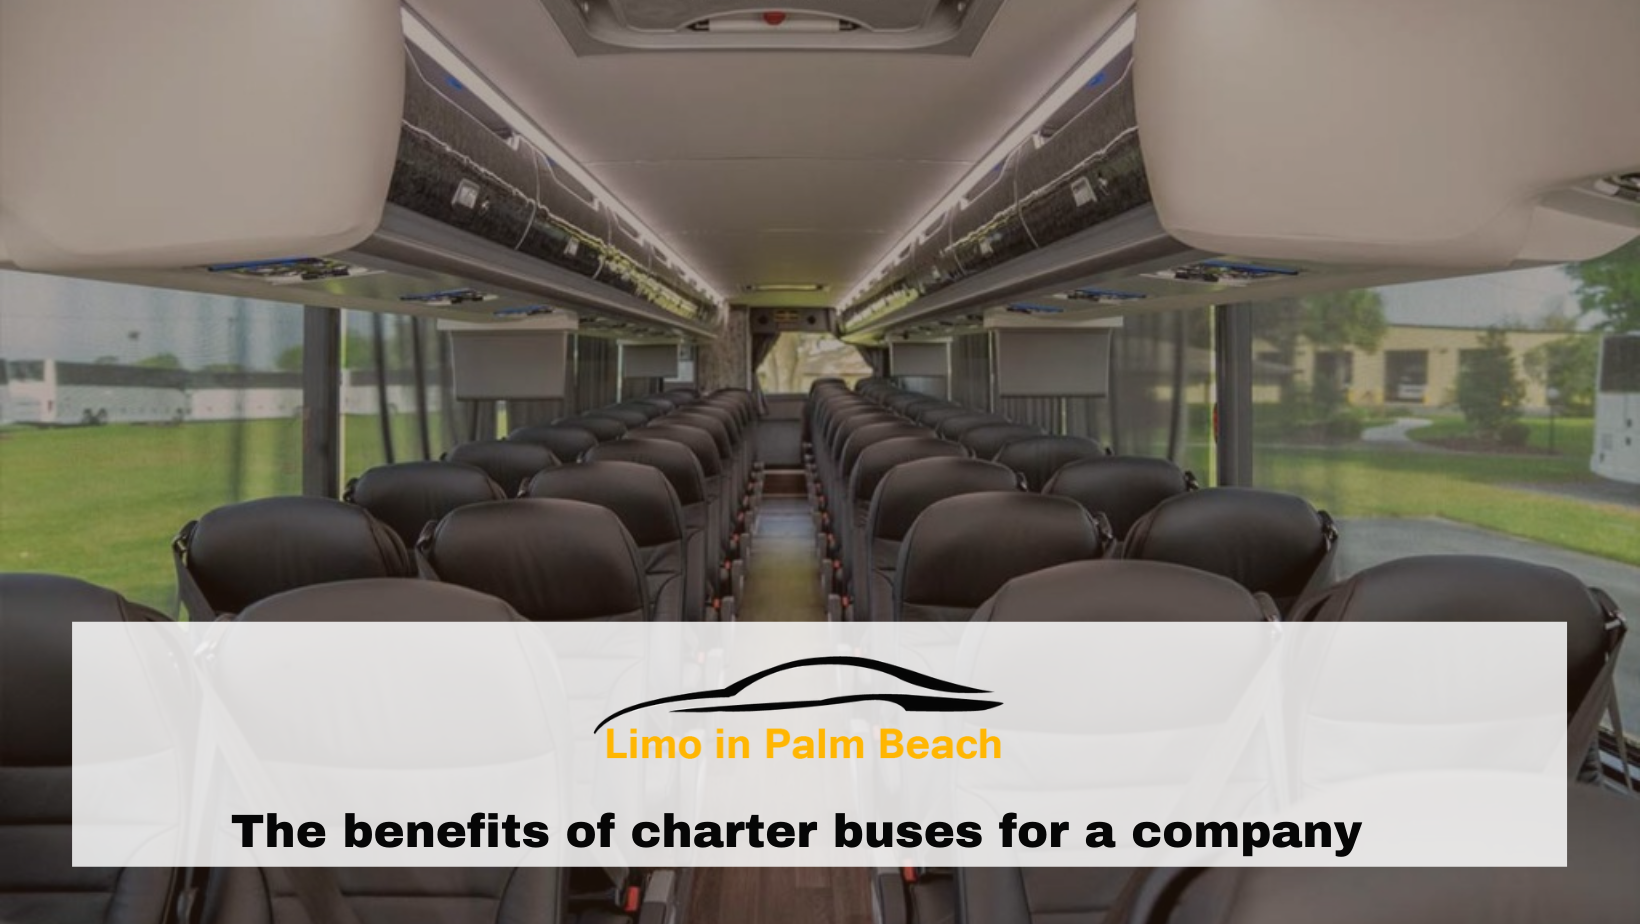 The benefits of charter buses for a company